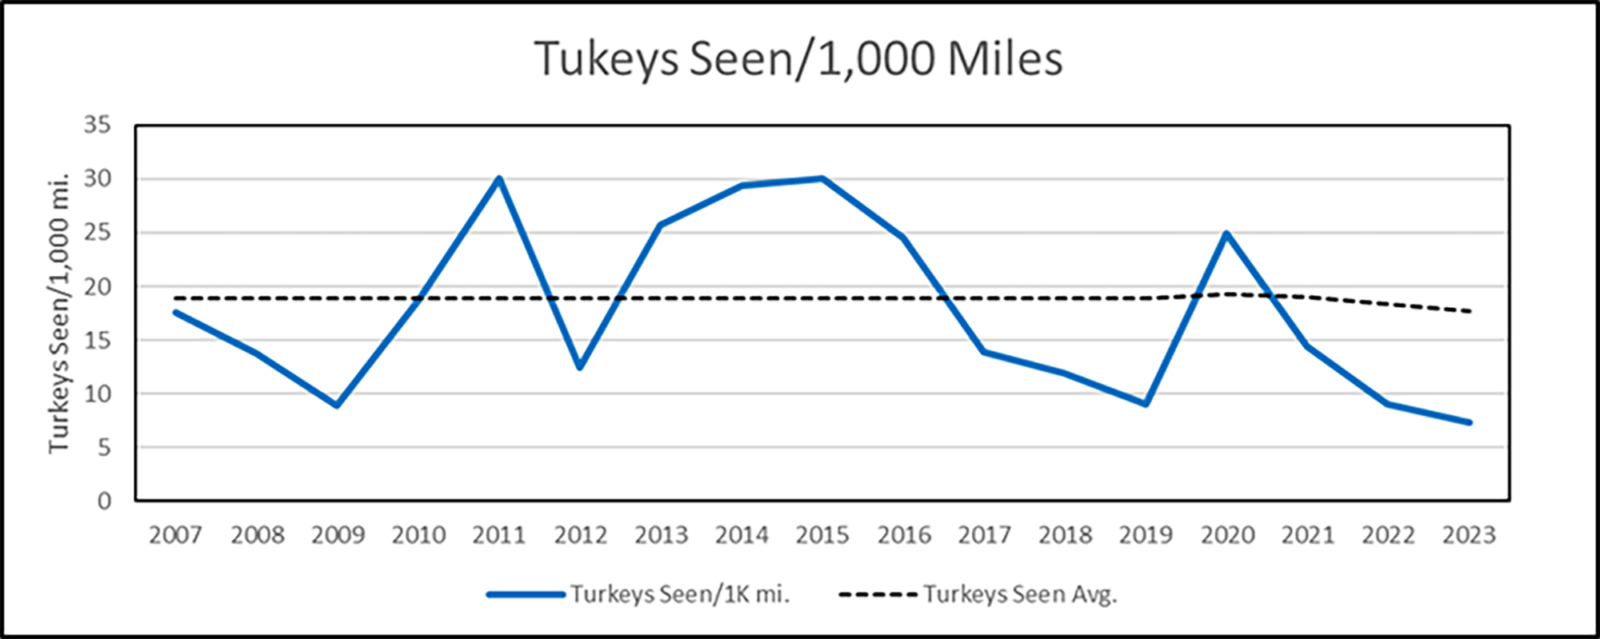 A graph showing the number of turkeys seen per 1,000 miles driven, which peaks in 2014 and 2015, then declines to lows in 2019 and 2023.